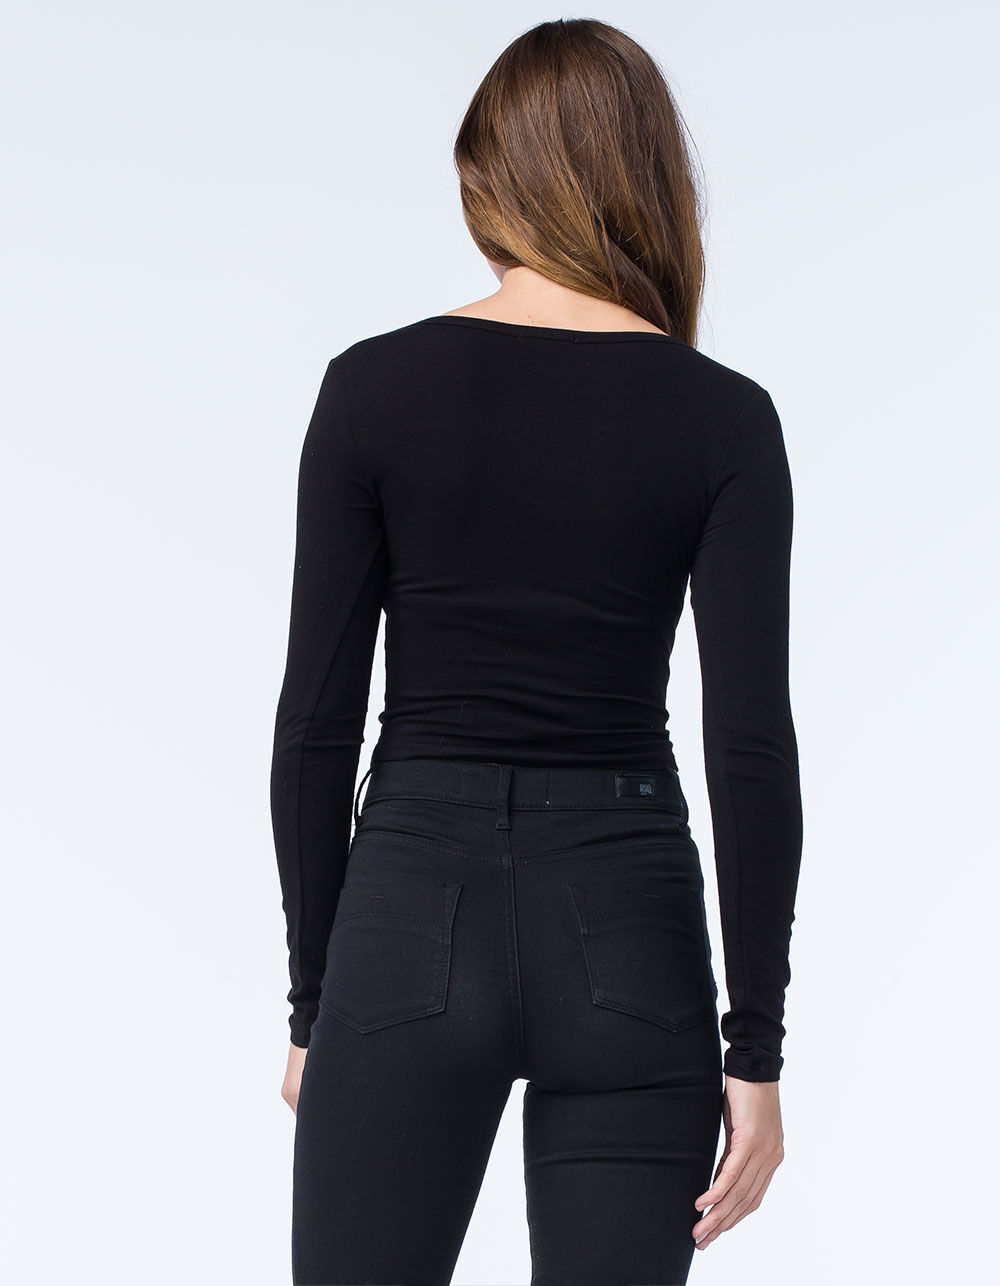 BOZZOLO Womens Long Sleeve Crop Top image number 2